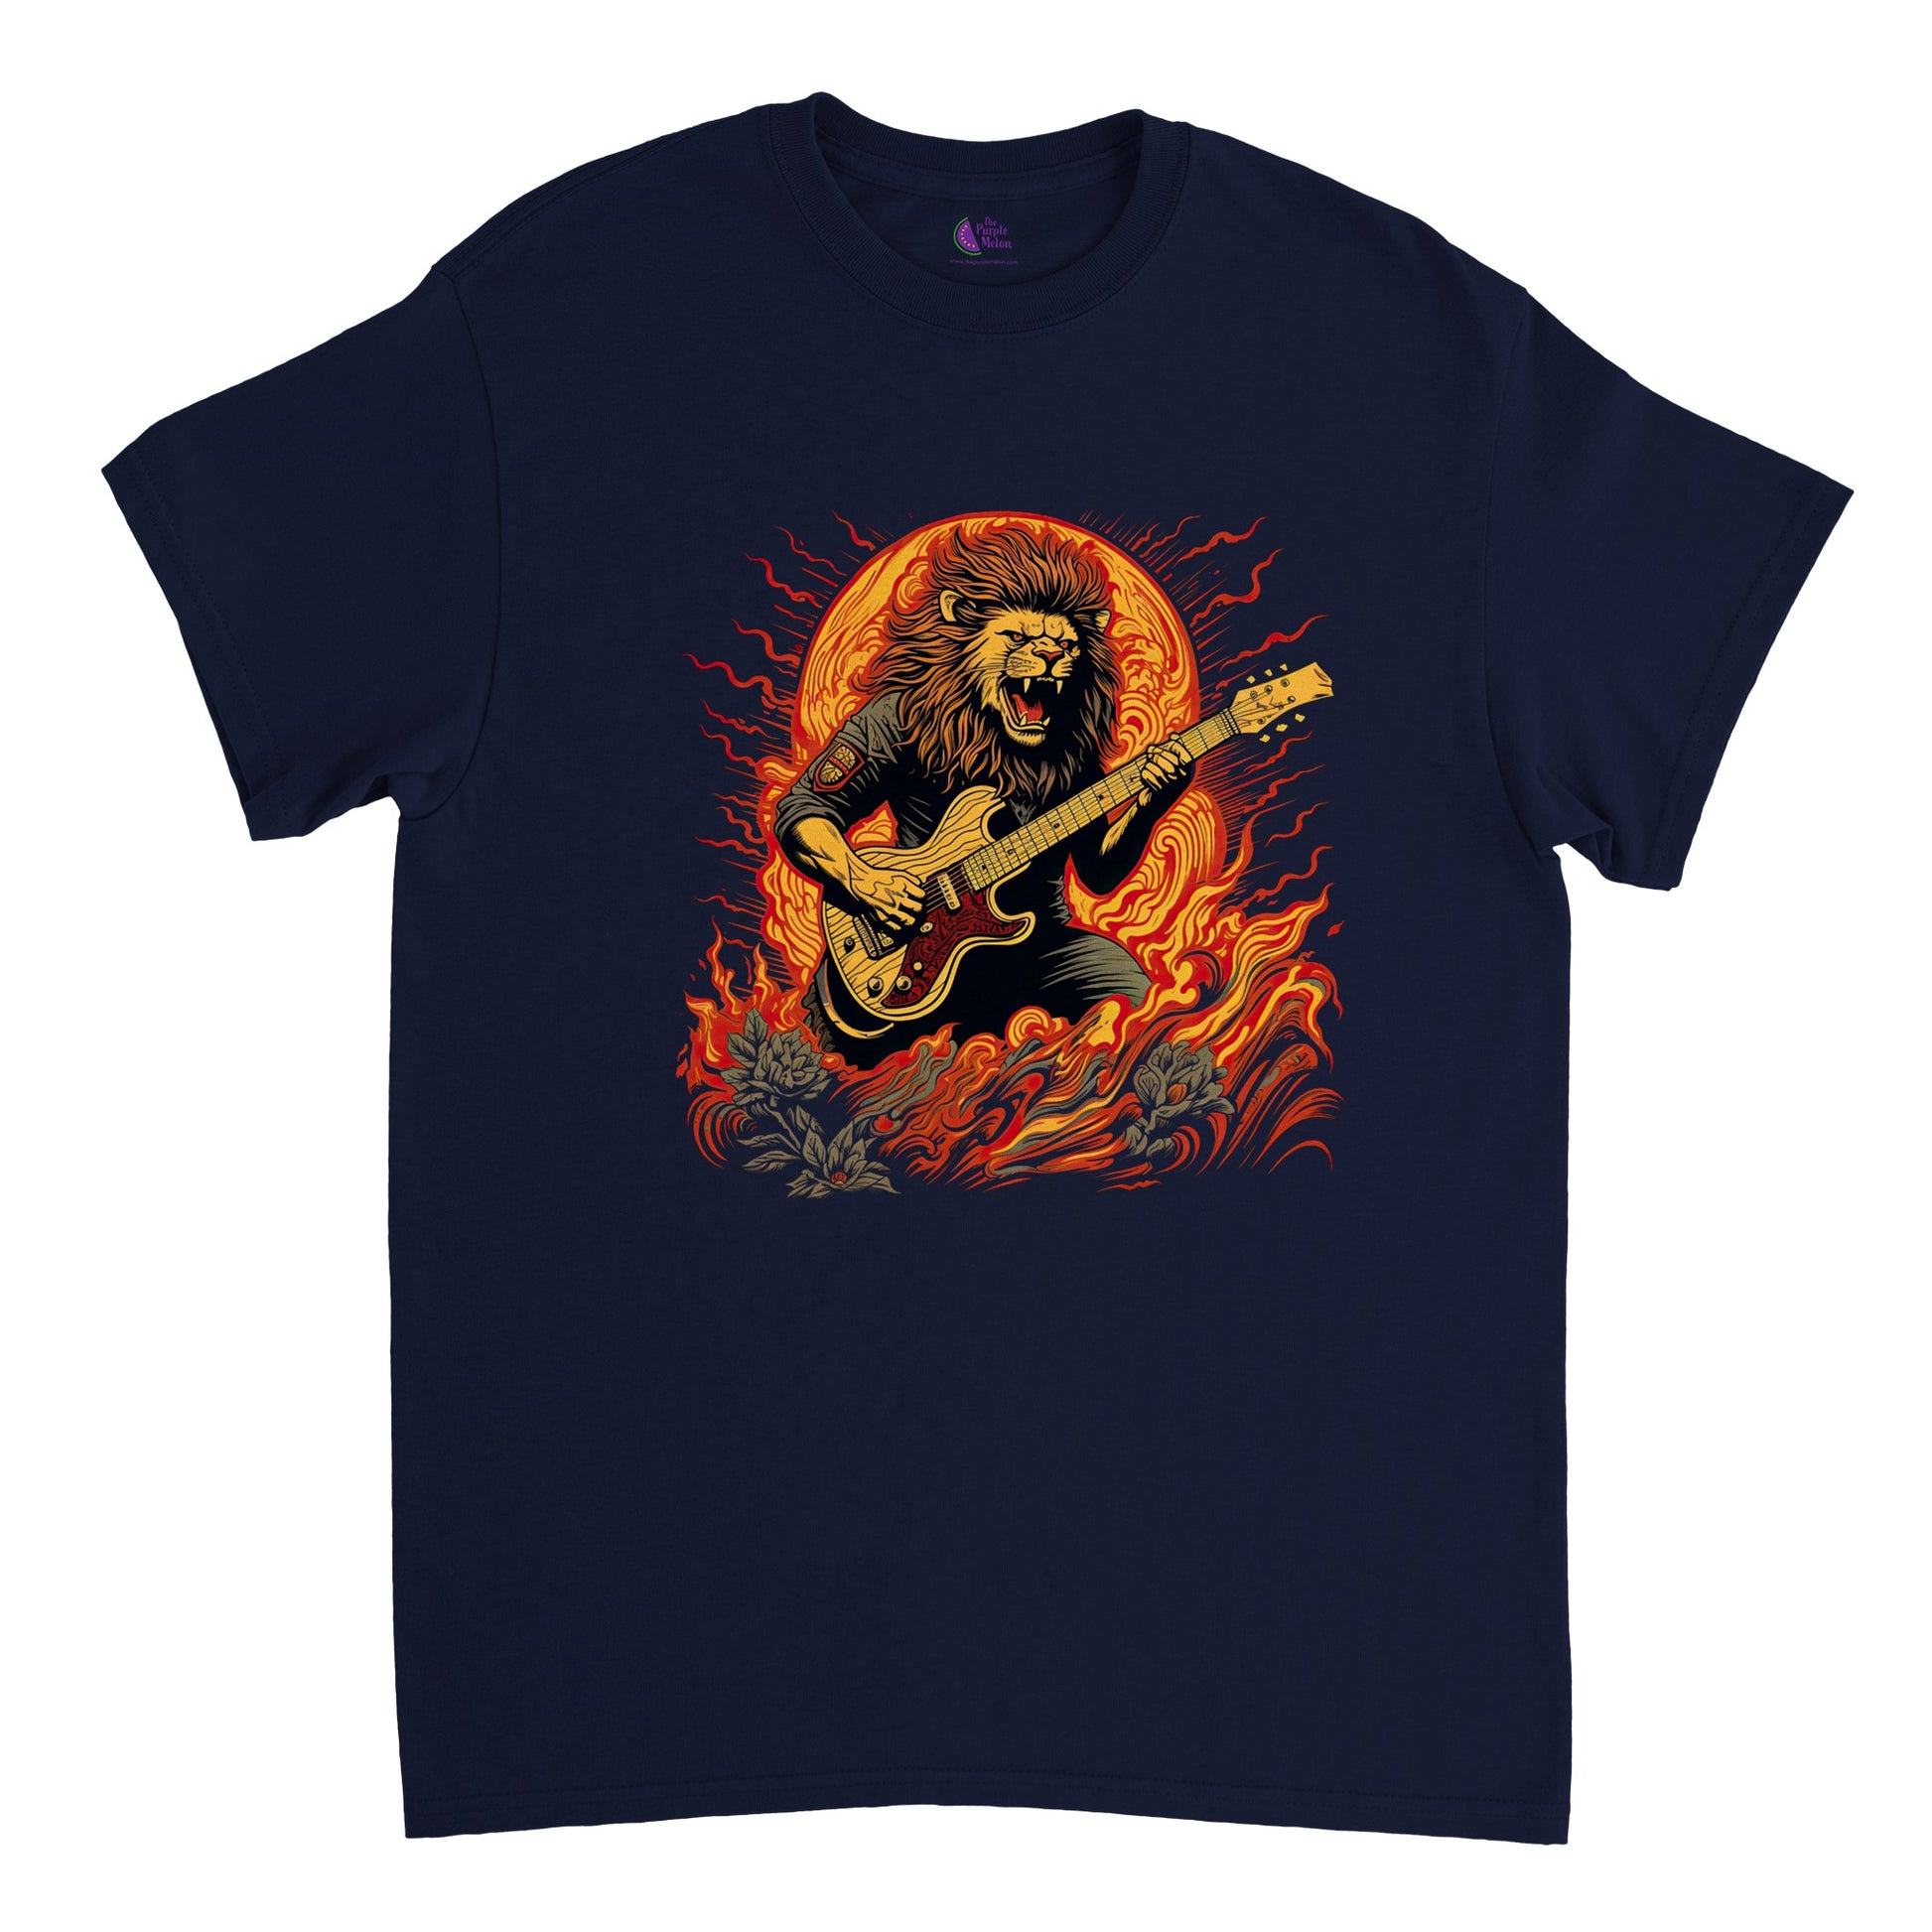 Navy blue t-shirt with a lion playing guitar print